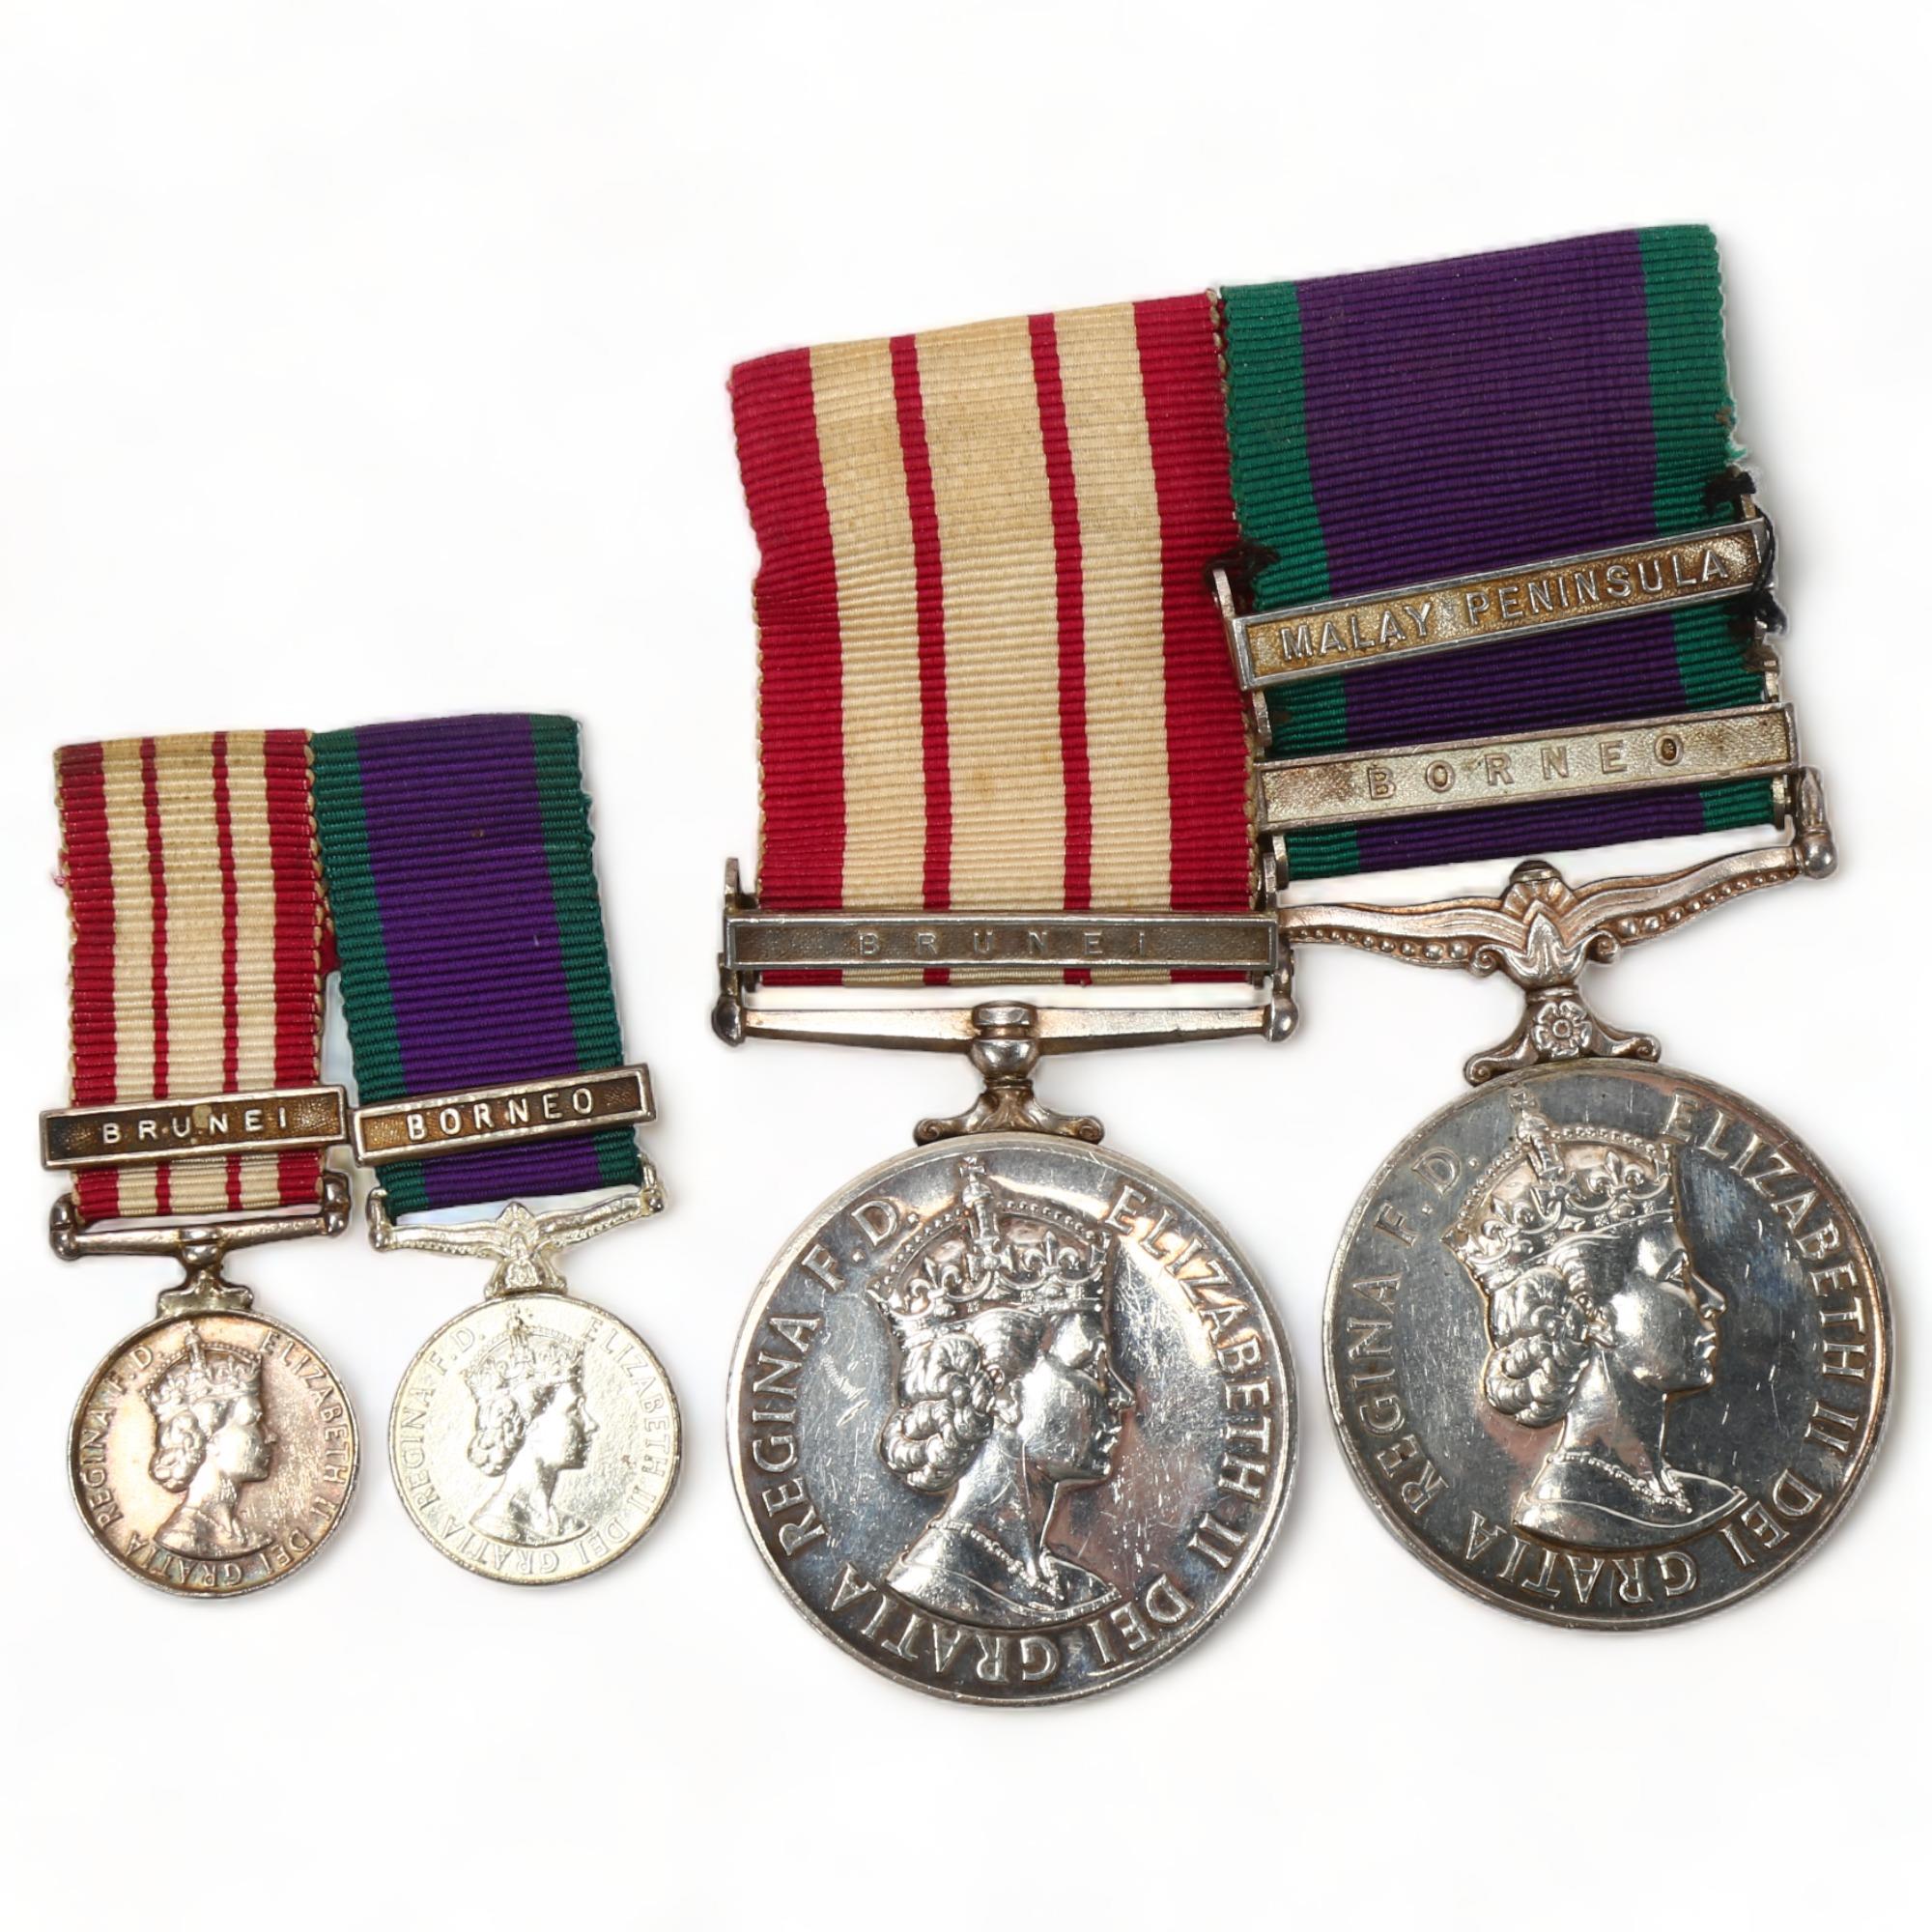 Navy General Service medal with Brunei bar, and Campaign Service medal with Borneo and Malay